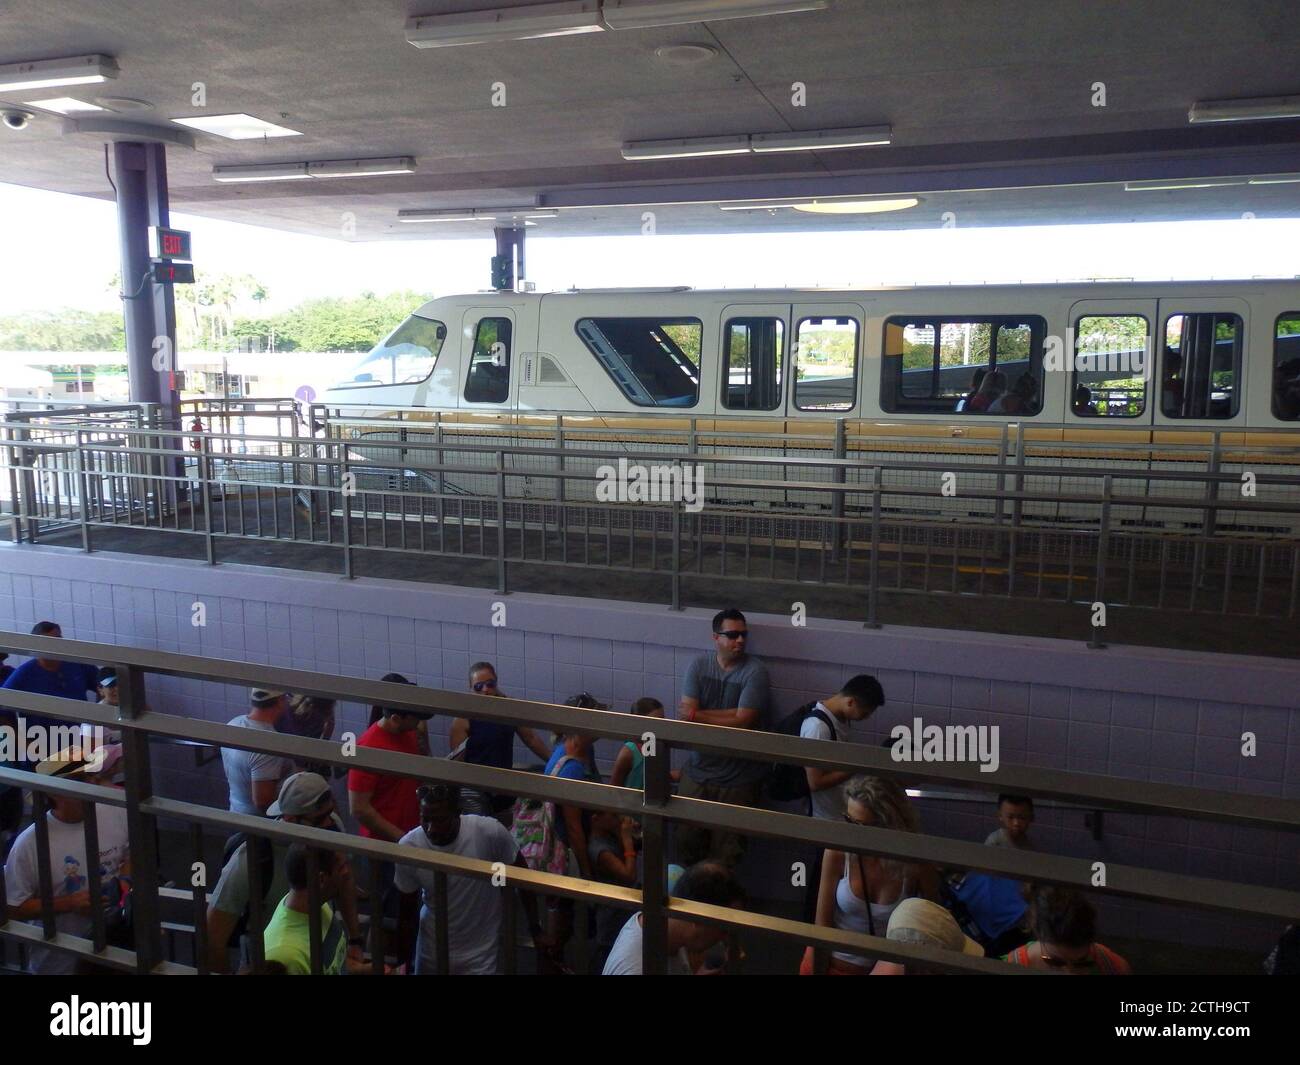 A monorail train stopped at a station in Epcot, Walt Disney World, Orlando, Florida, USA Stock Photo